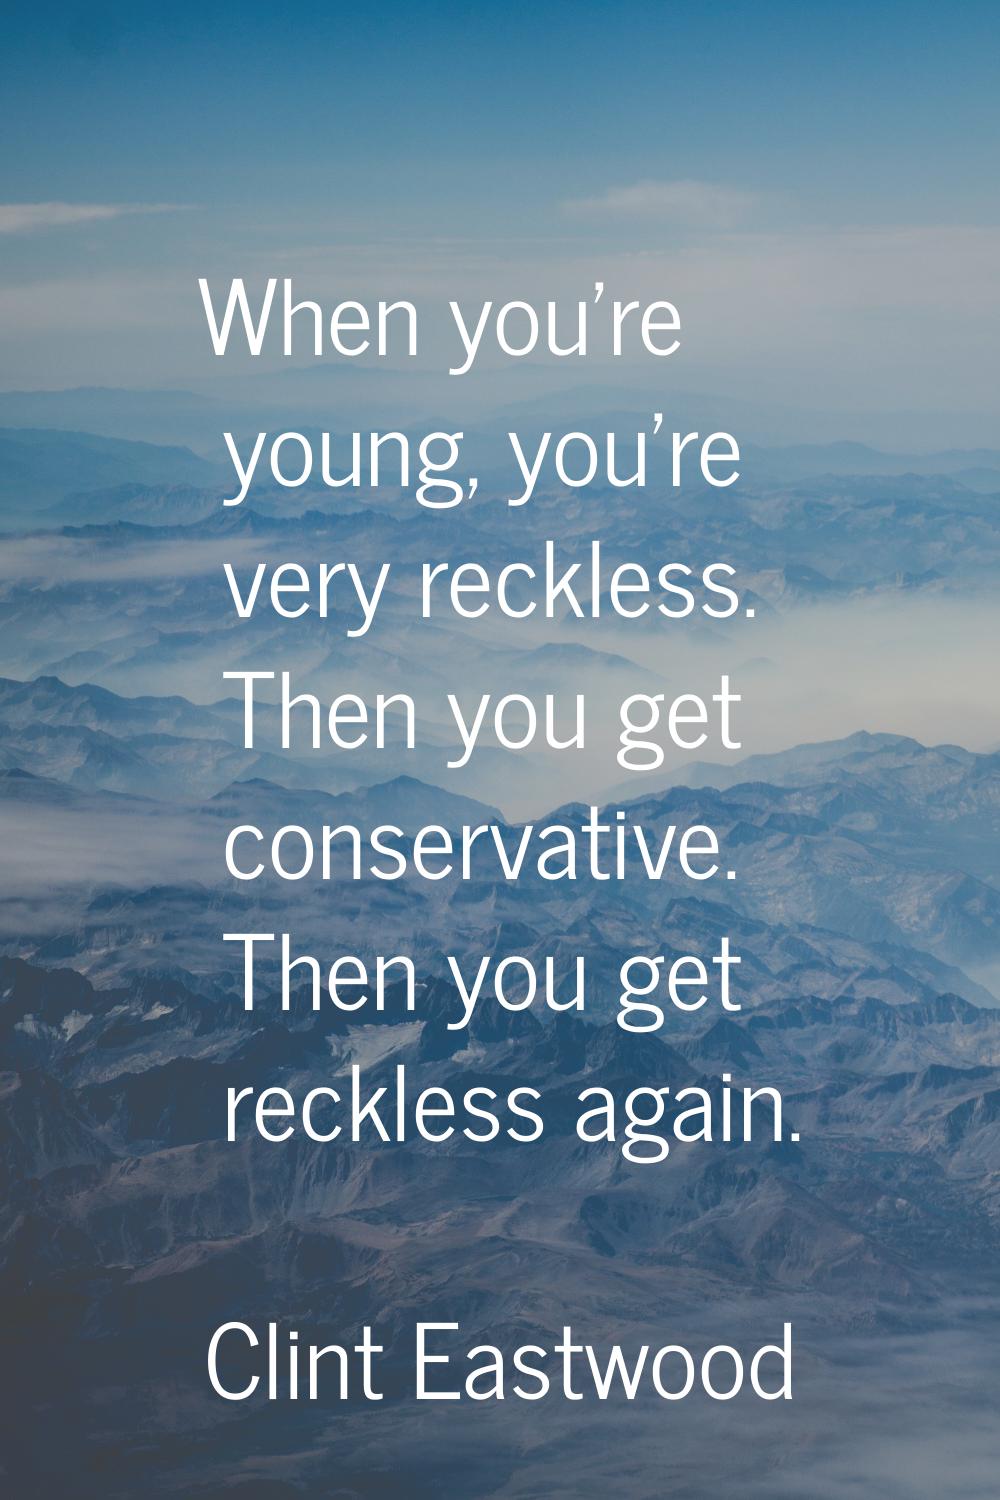 When you're young, you're very reckless. Then you get conservative. Then you get reckless again.